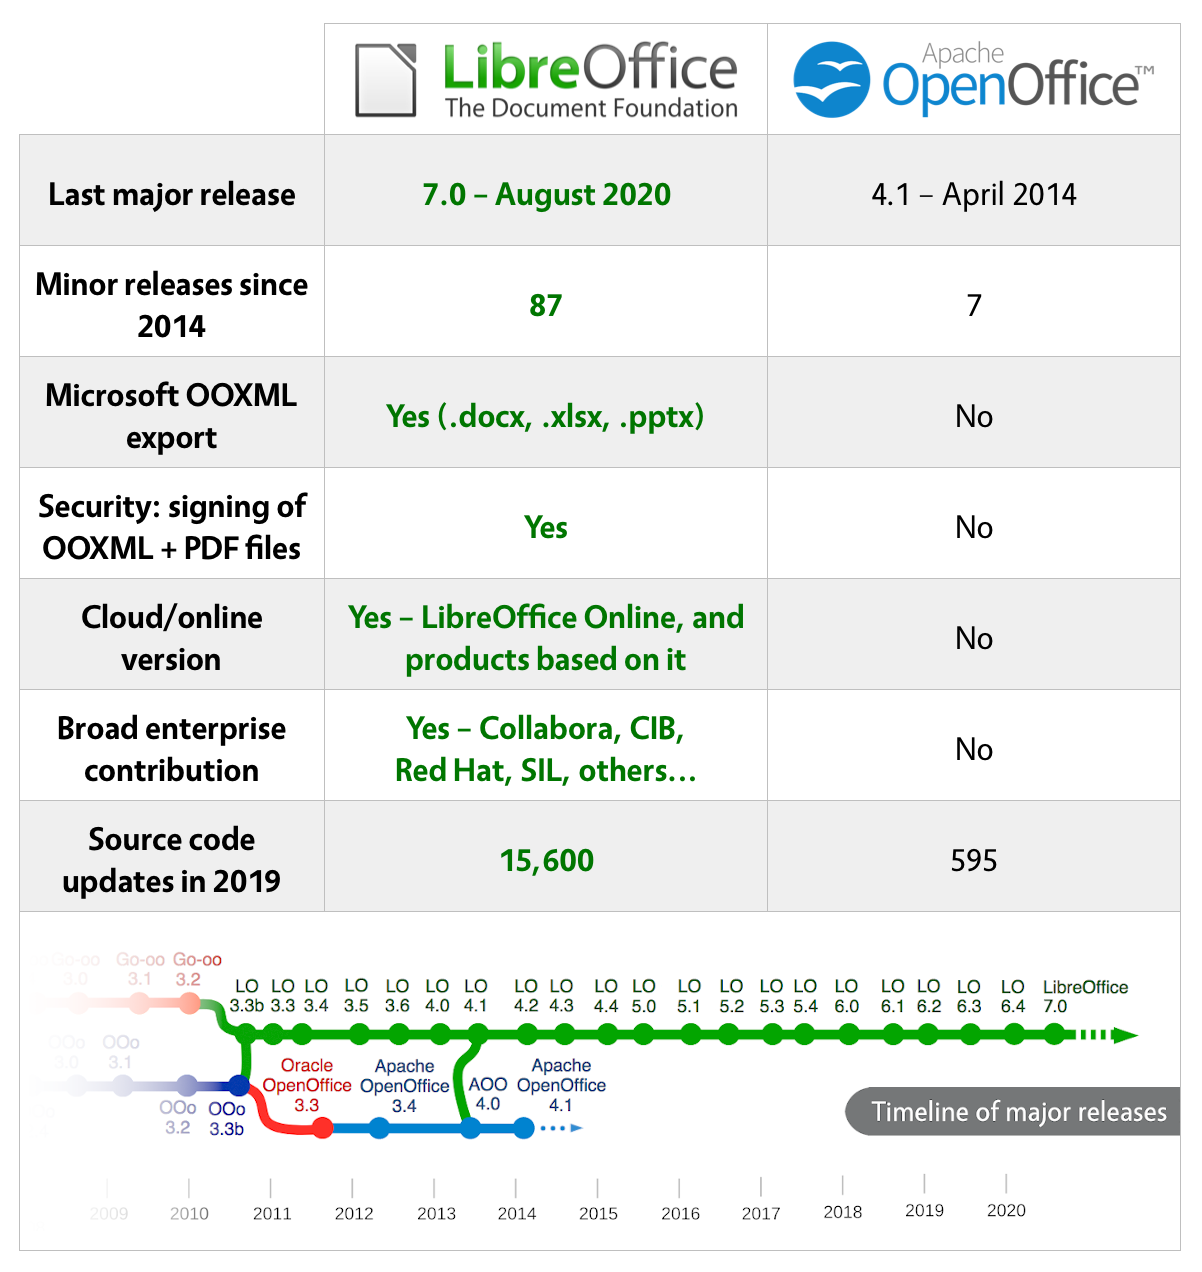 libreoffice vs openoffice ms office compatibility